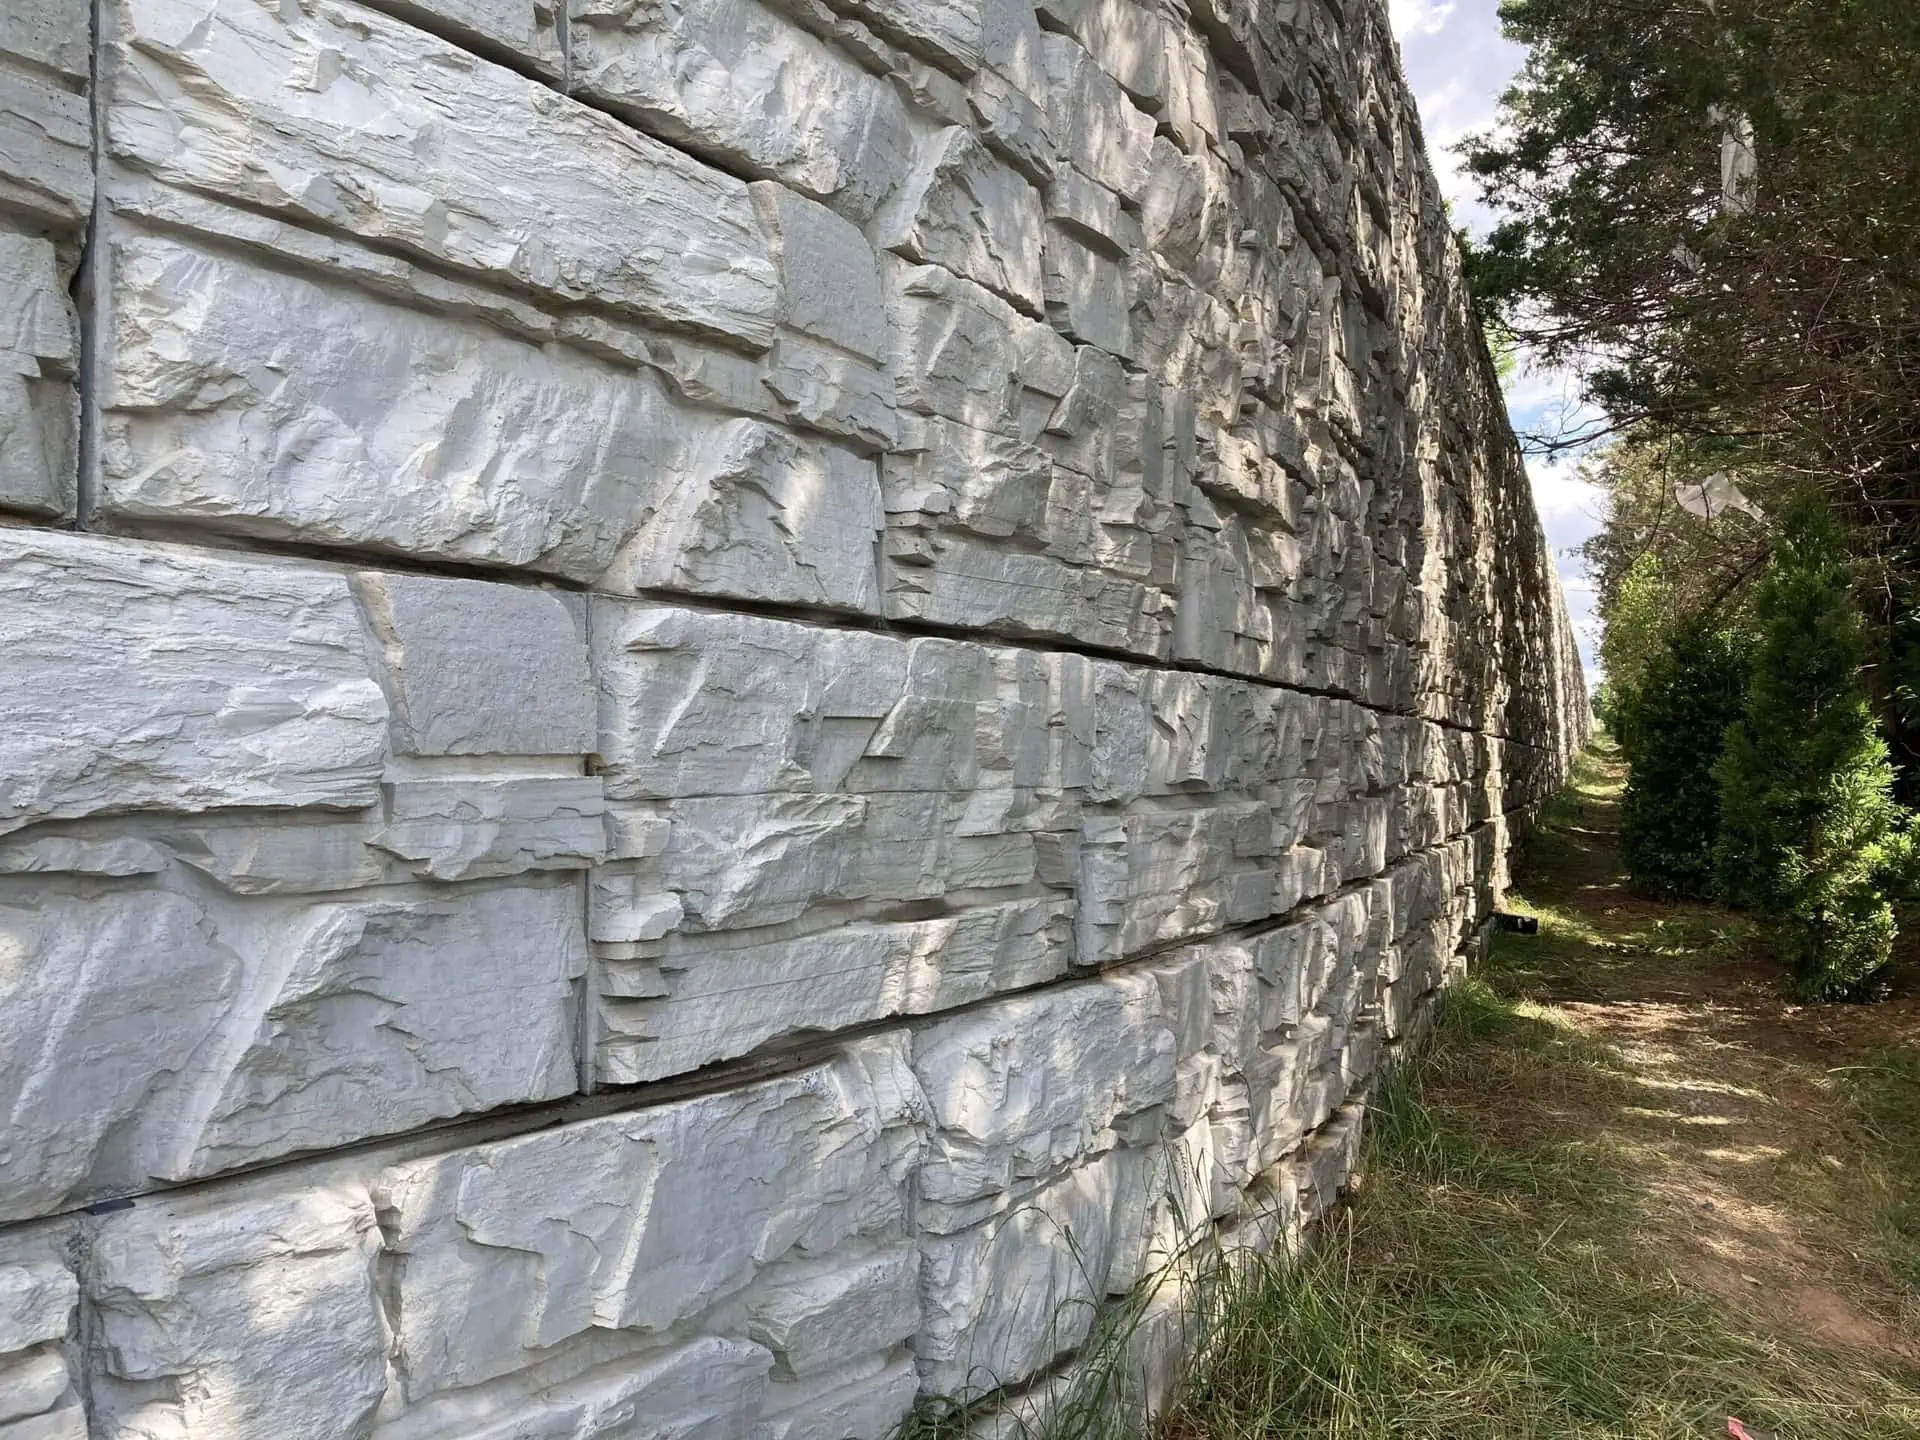 Long and tall MagnumStone retaining wall.